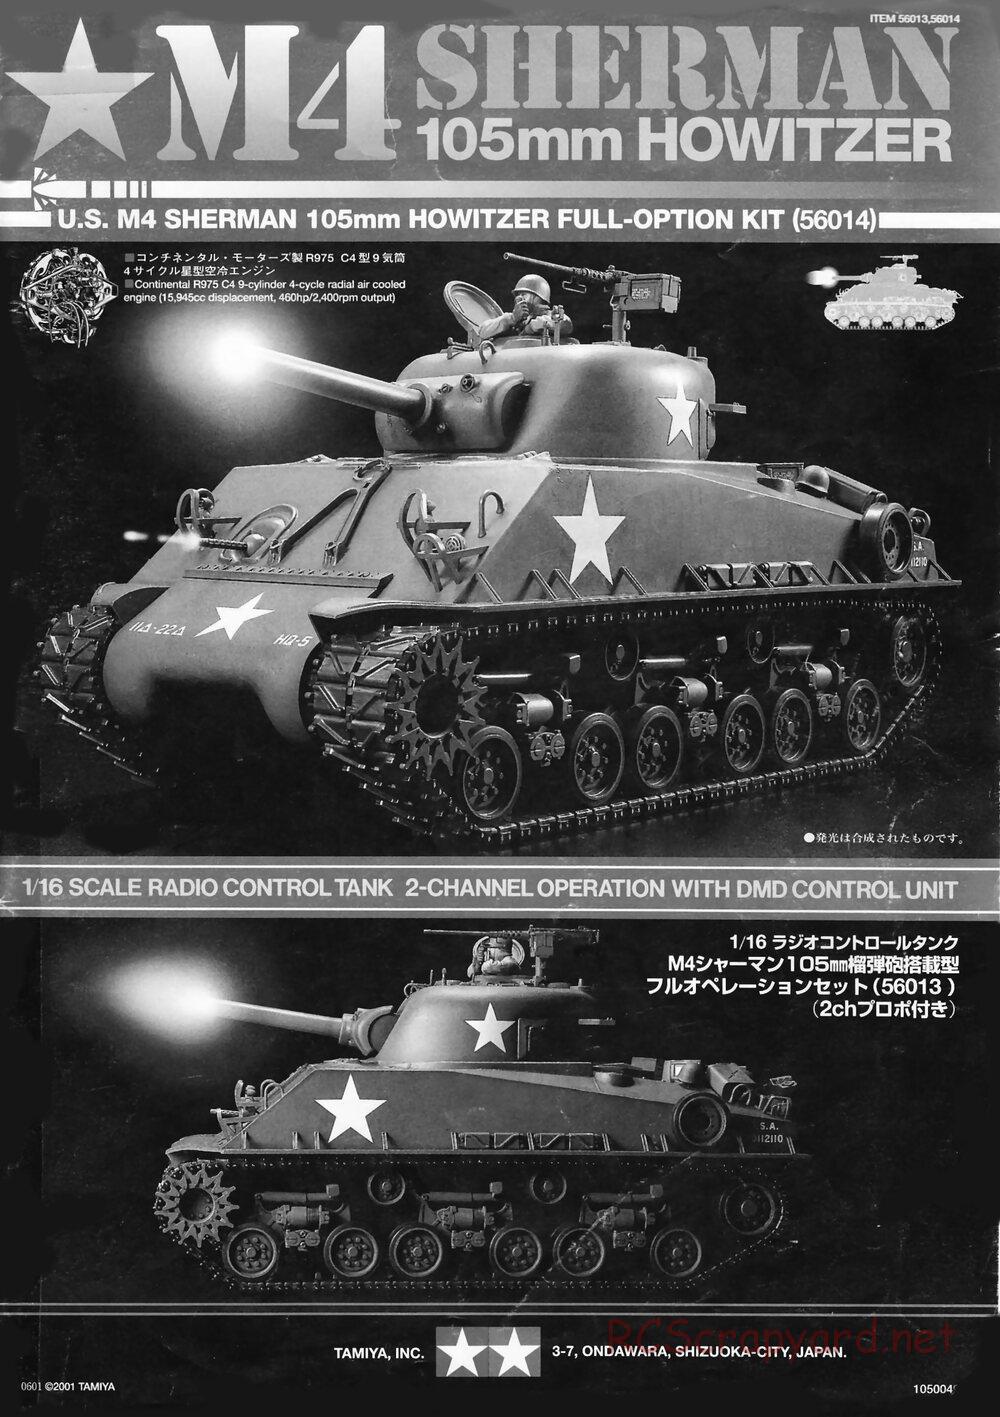 Tamiya - M4 Sherman 105mm Howitzer - 1/16 Scale Chassis - Manual - Page 1